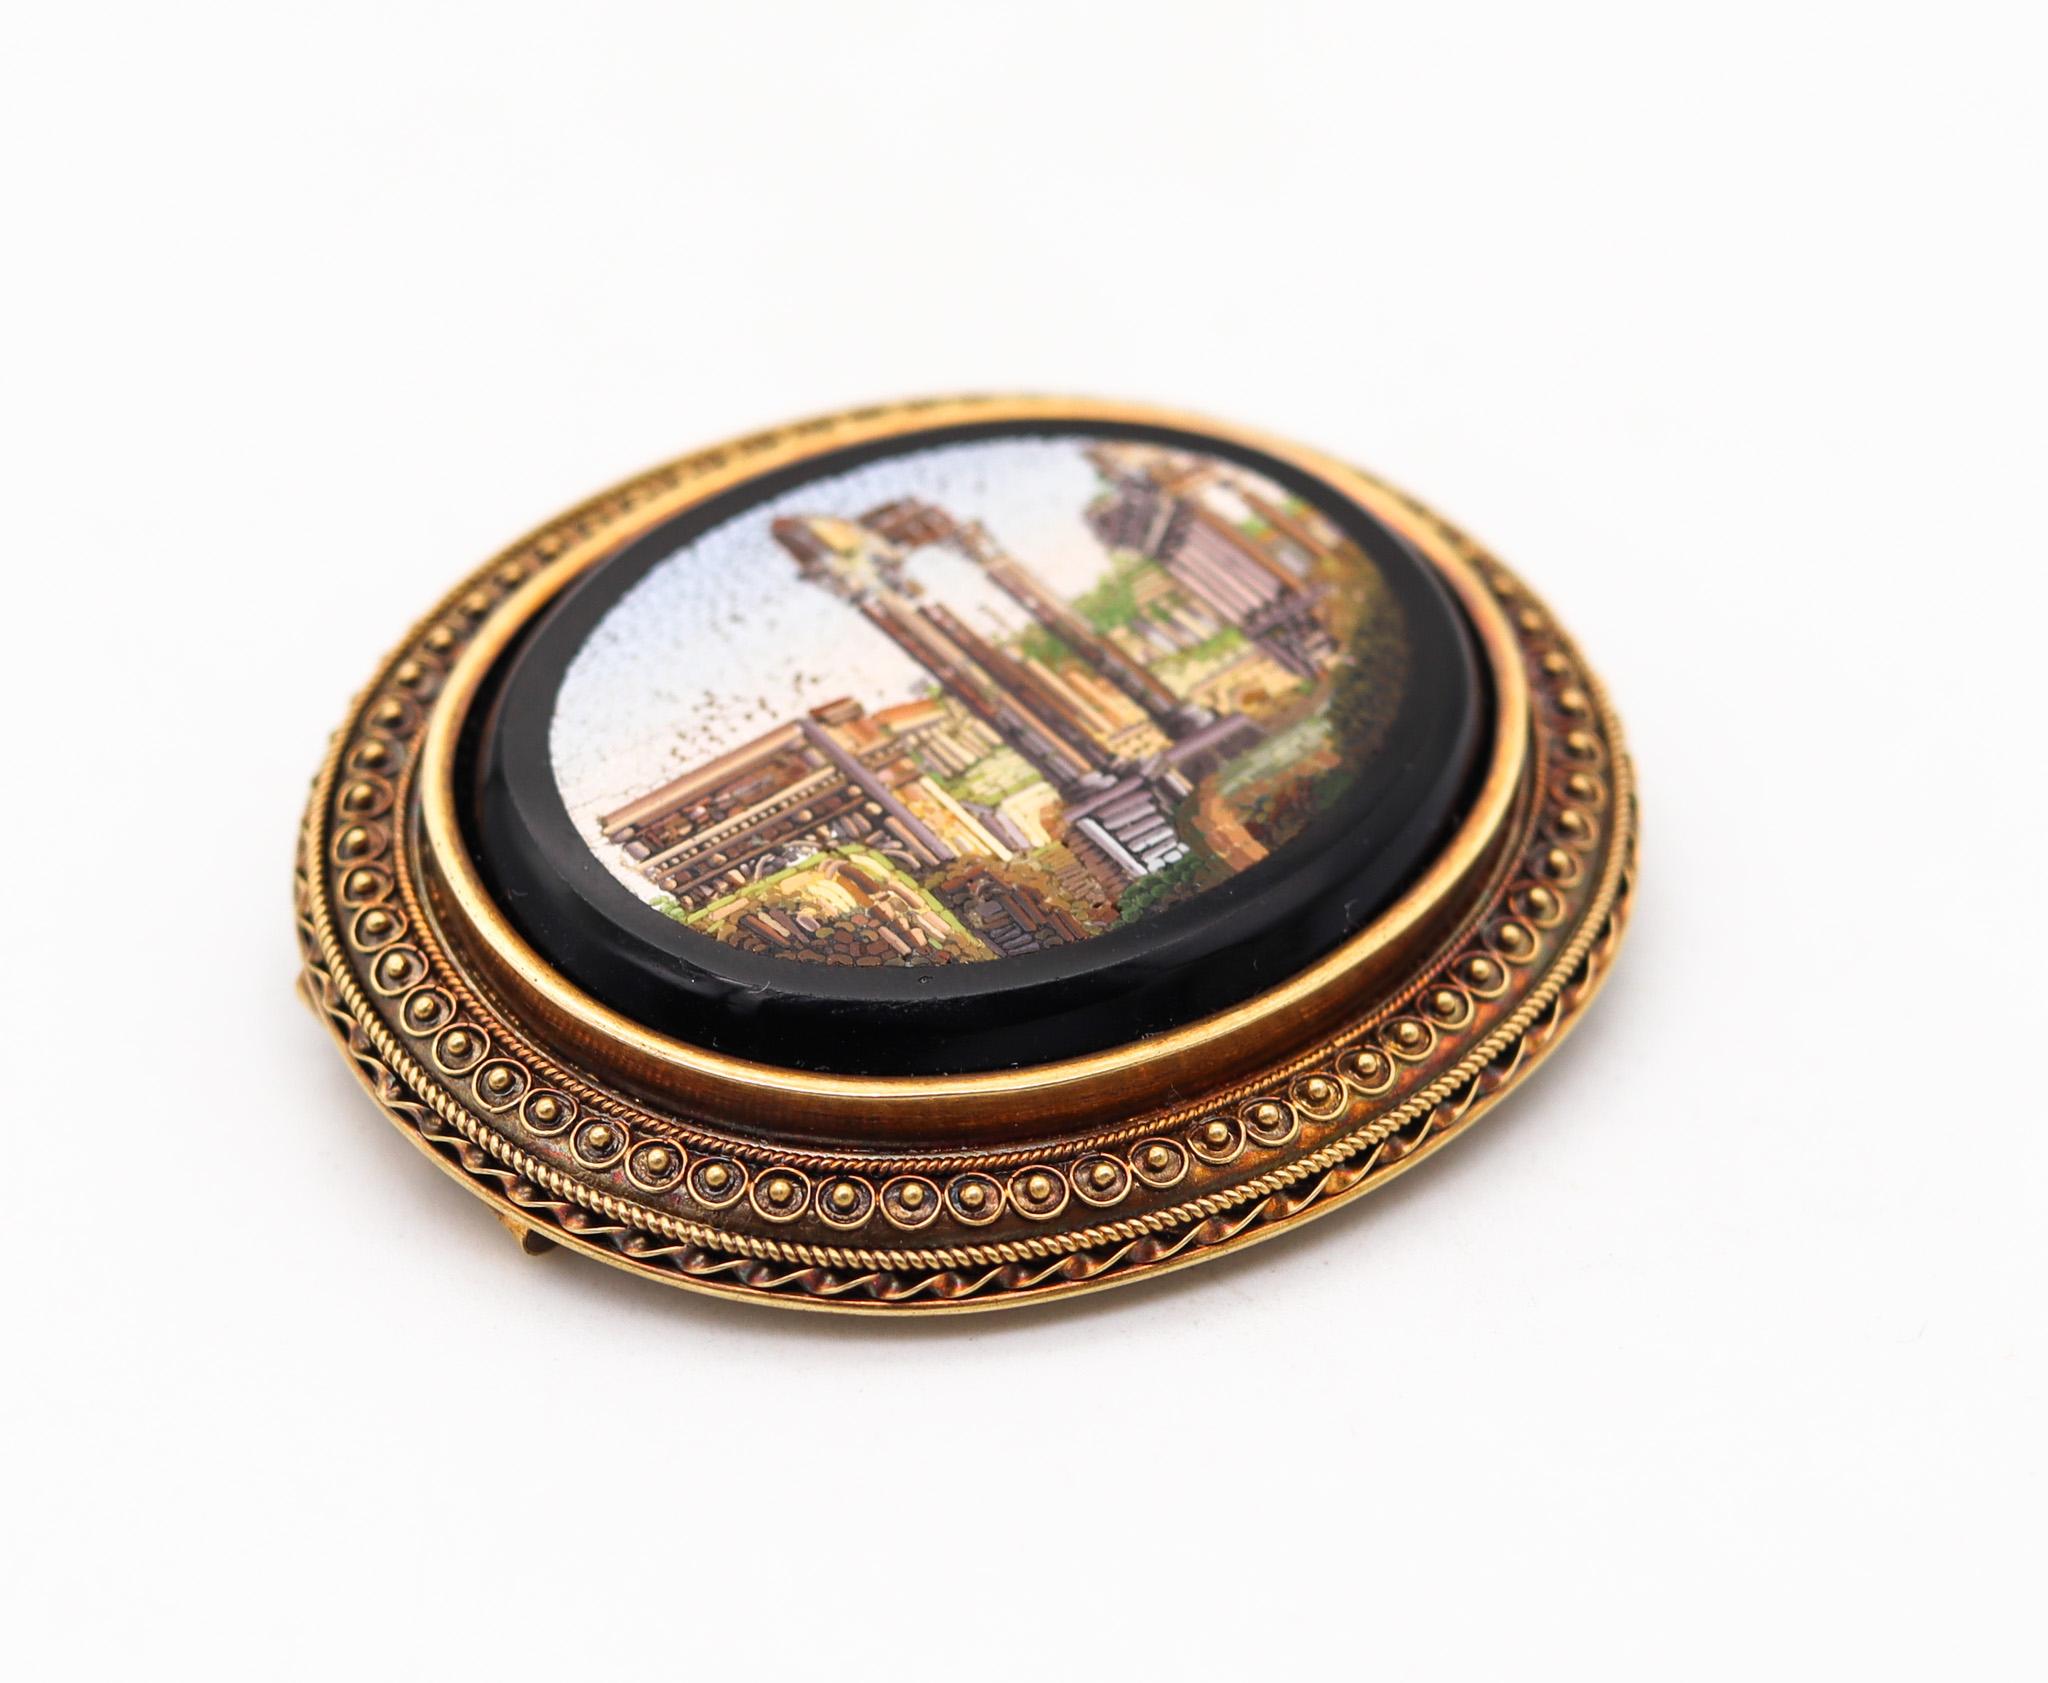 A Roman revival grand tour brooch.

An exceptional piece, created in Italy during the Victorian (1840-1901) grand tour era, back in the 1880. It was carefully crafted with Roman-Etruscan revival patterns in solid rich yellow gold of 18 karats and